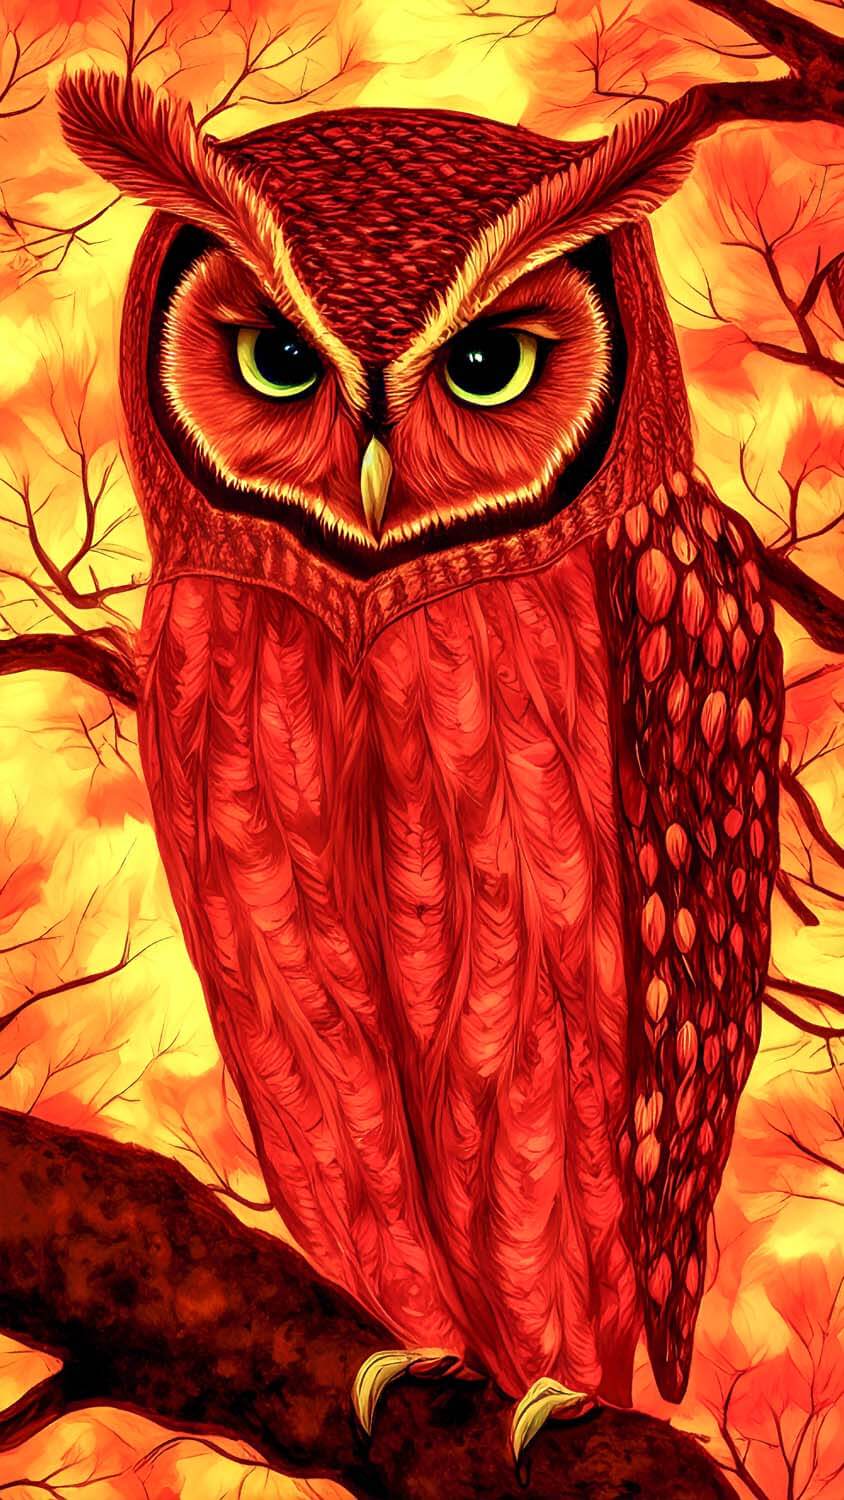 The Owl Painting iPhone Wallpaper HD